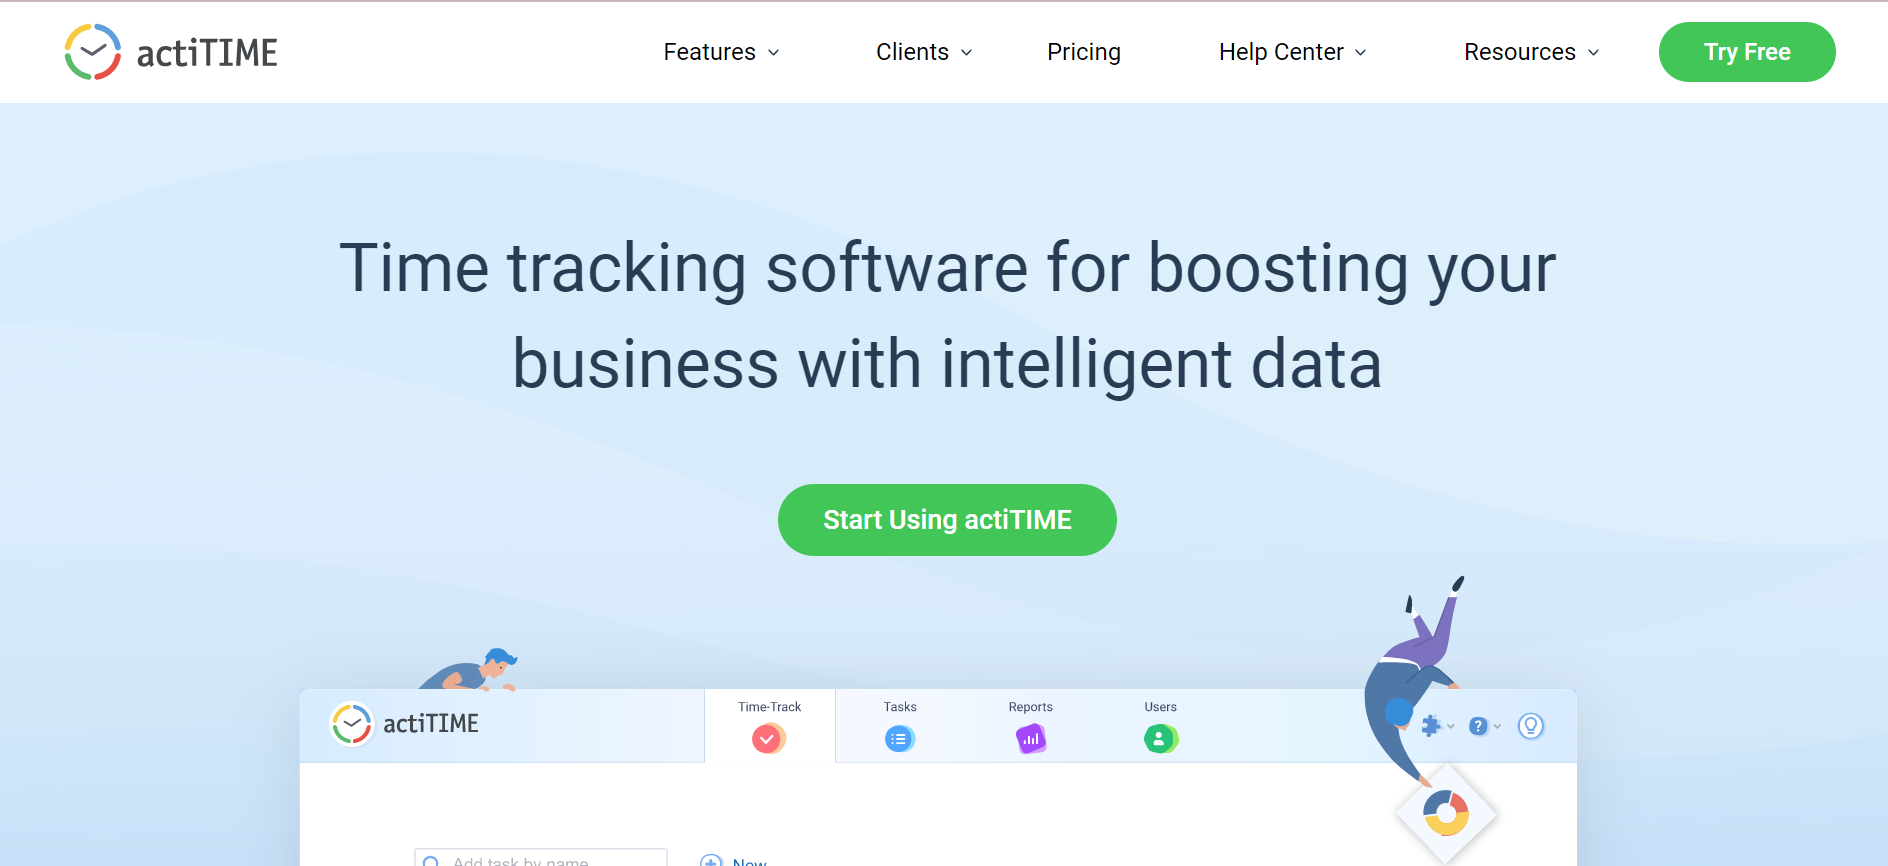 actiTIME homepage - time tracking software for small business owners and enterprises